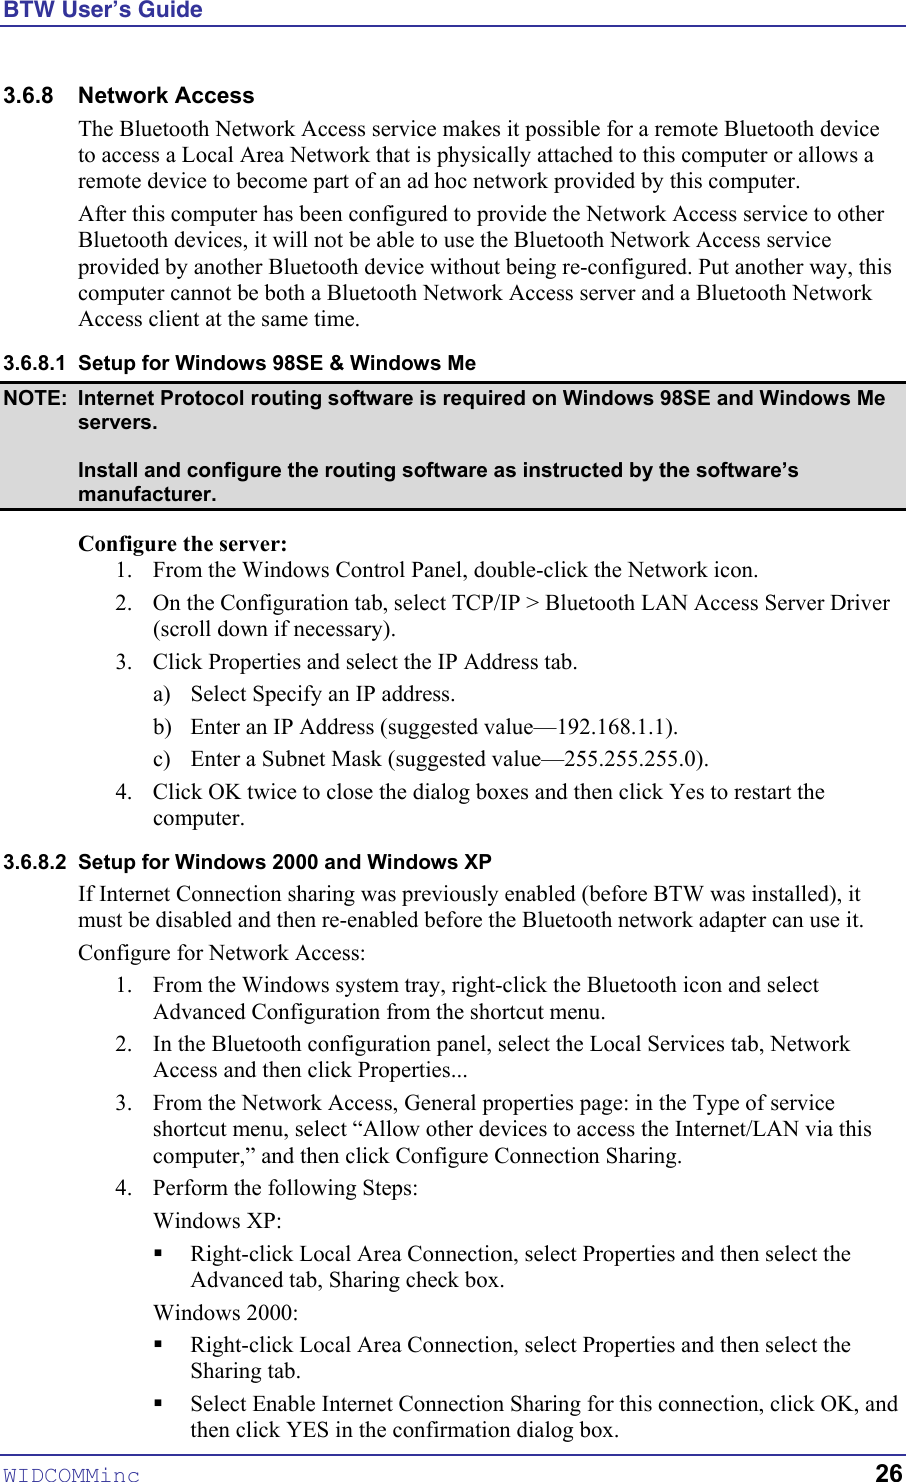 BTW User’s Guide WIDCOMMinc   26 3.6.8 Network Access The Bluetooth Network Access service makes it possible for a remote Bluetooth device to access a Local Area Network that is physically attached to this computer or allows a remote device to become part of an ad hoc network provided by this computer. After this computer has been configured to provide the Network Access service to other Bluetooth devices, it will not be able to use the Bluetooth Network Access service provided by another Bluetooth device without being re-configured. Put another way, this computer cannot be both a Bluetooth Network Access server and a Bluetooth Network Access client at the same time. 3.6.8.1  Setup for Windows 98SE &amp; Windows Me NOTE:  Internet Protocol routing software is required on Windows 98SE and Windows Me servers.   Install and configure the routing software as instructed by the software’s manufacturer. Configure the server: 1.  From the Windows Control Panel, double-click the Network icon. 2.  On the Configuration tab, select TCP/IP &gt; Bluetooth LAN Access Server Driver (scroll down if necessary). 3.  Click Properties and select the IP Address tab. a)  Select Specify an IP address. b)  Enter an IP Address (suggested value—192.168.1.1). c)  Enter a Subnet Mask (suggested value—255.255.255.0). 4.  Click OK twice to close the dialog boxes and then click Yes to restart the computer. 3.6.8.2  Setup for Windows 2000 and Windows XP If Internet Connection sharing was previously enabled (before BTW was installed), it must be disabled and then re-enabled before the Bluetooth network adapter can use it.  Configure for Network Access: 1.  From the Windows system tray, right-click the Bluetooth icon and select Advanced Configuration from the shortcut menu. 2.  In the Bluetooth configuration panel, select the Local Services tab, Network Access and then click Properties... 3.  From the Network Access, General properties page: in the Type of service shortcut menu, select “Allow other devices to access the Internet/LAN via this computer,” and then click Configure Connection Sharing. 4.  Perform the following Steps: Windows XP:  !  Right-click Local Area Connection, select Properties and then select the Advanced tab, Sharing check box. Windows 2000:  !  Right-click Local Area Connection, select Properties and then select the Sharing tab. !  Select Enable Internet Connection Sharing for this connection, click OK, and then click YES in the confirmation dialog box. 